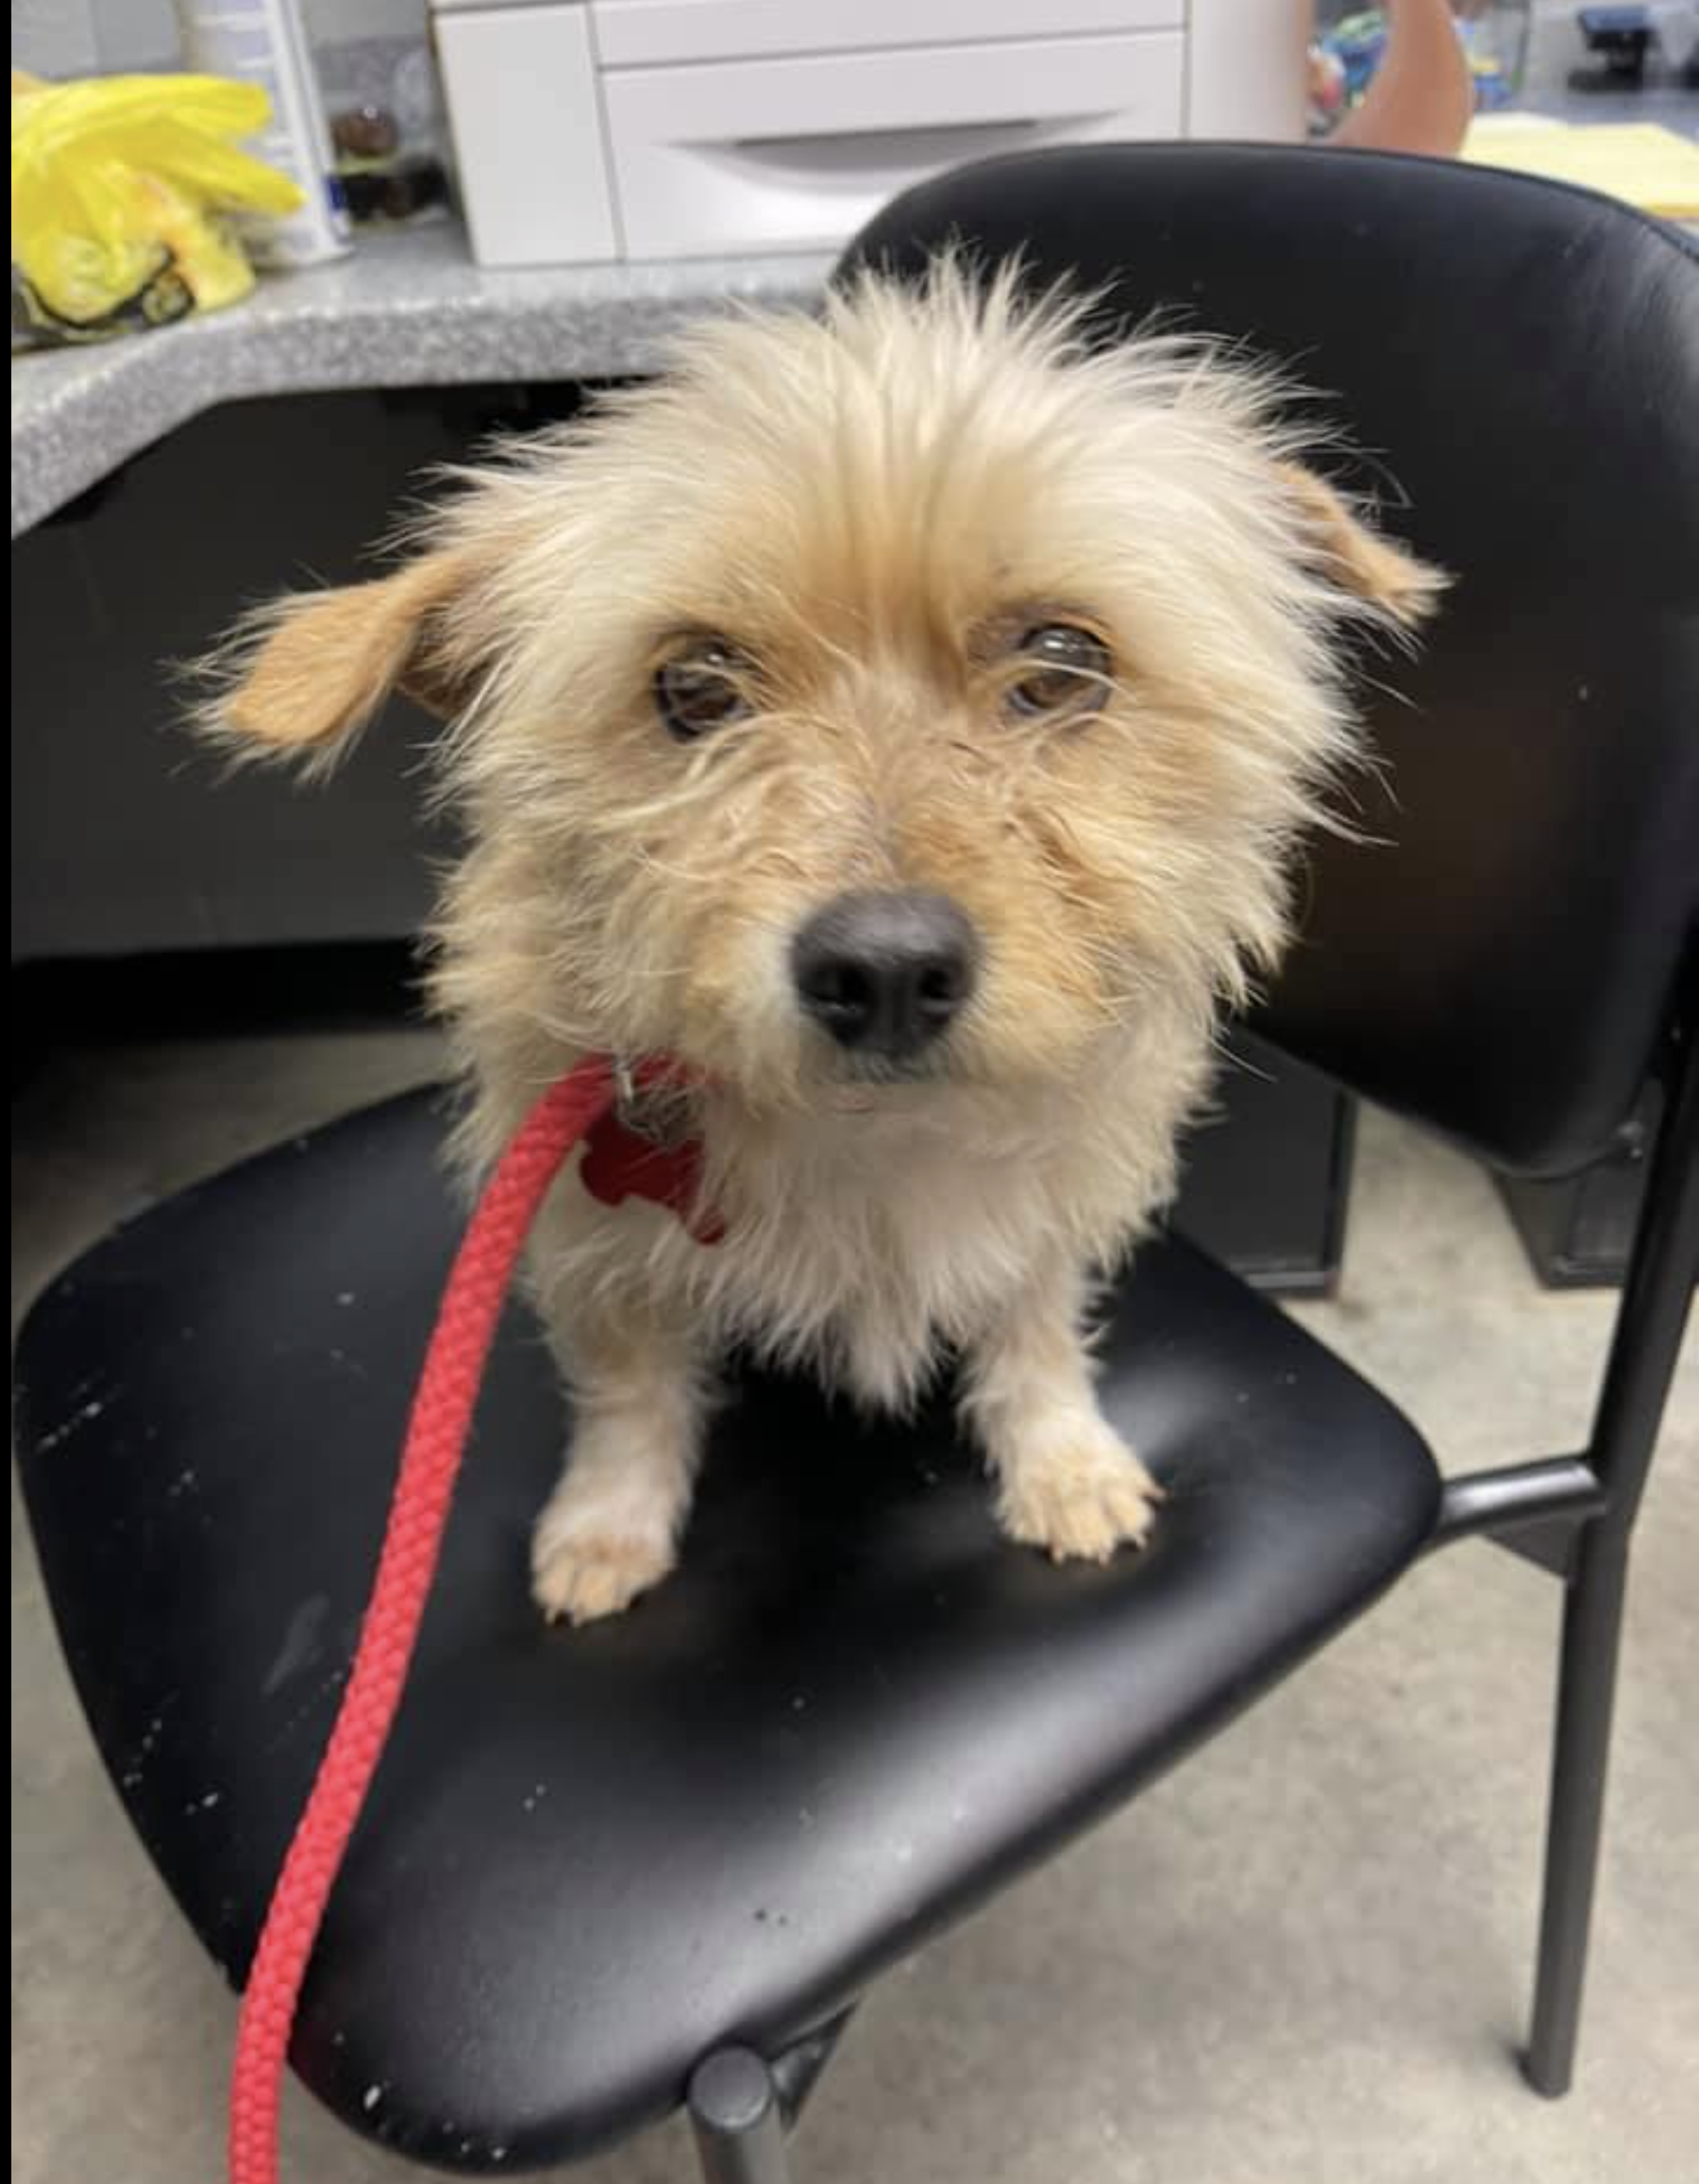 June: 2-3 yr old terrier mix